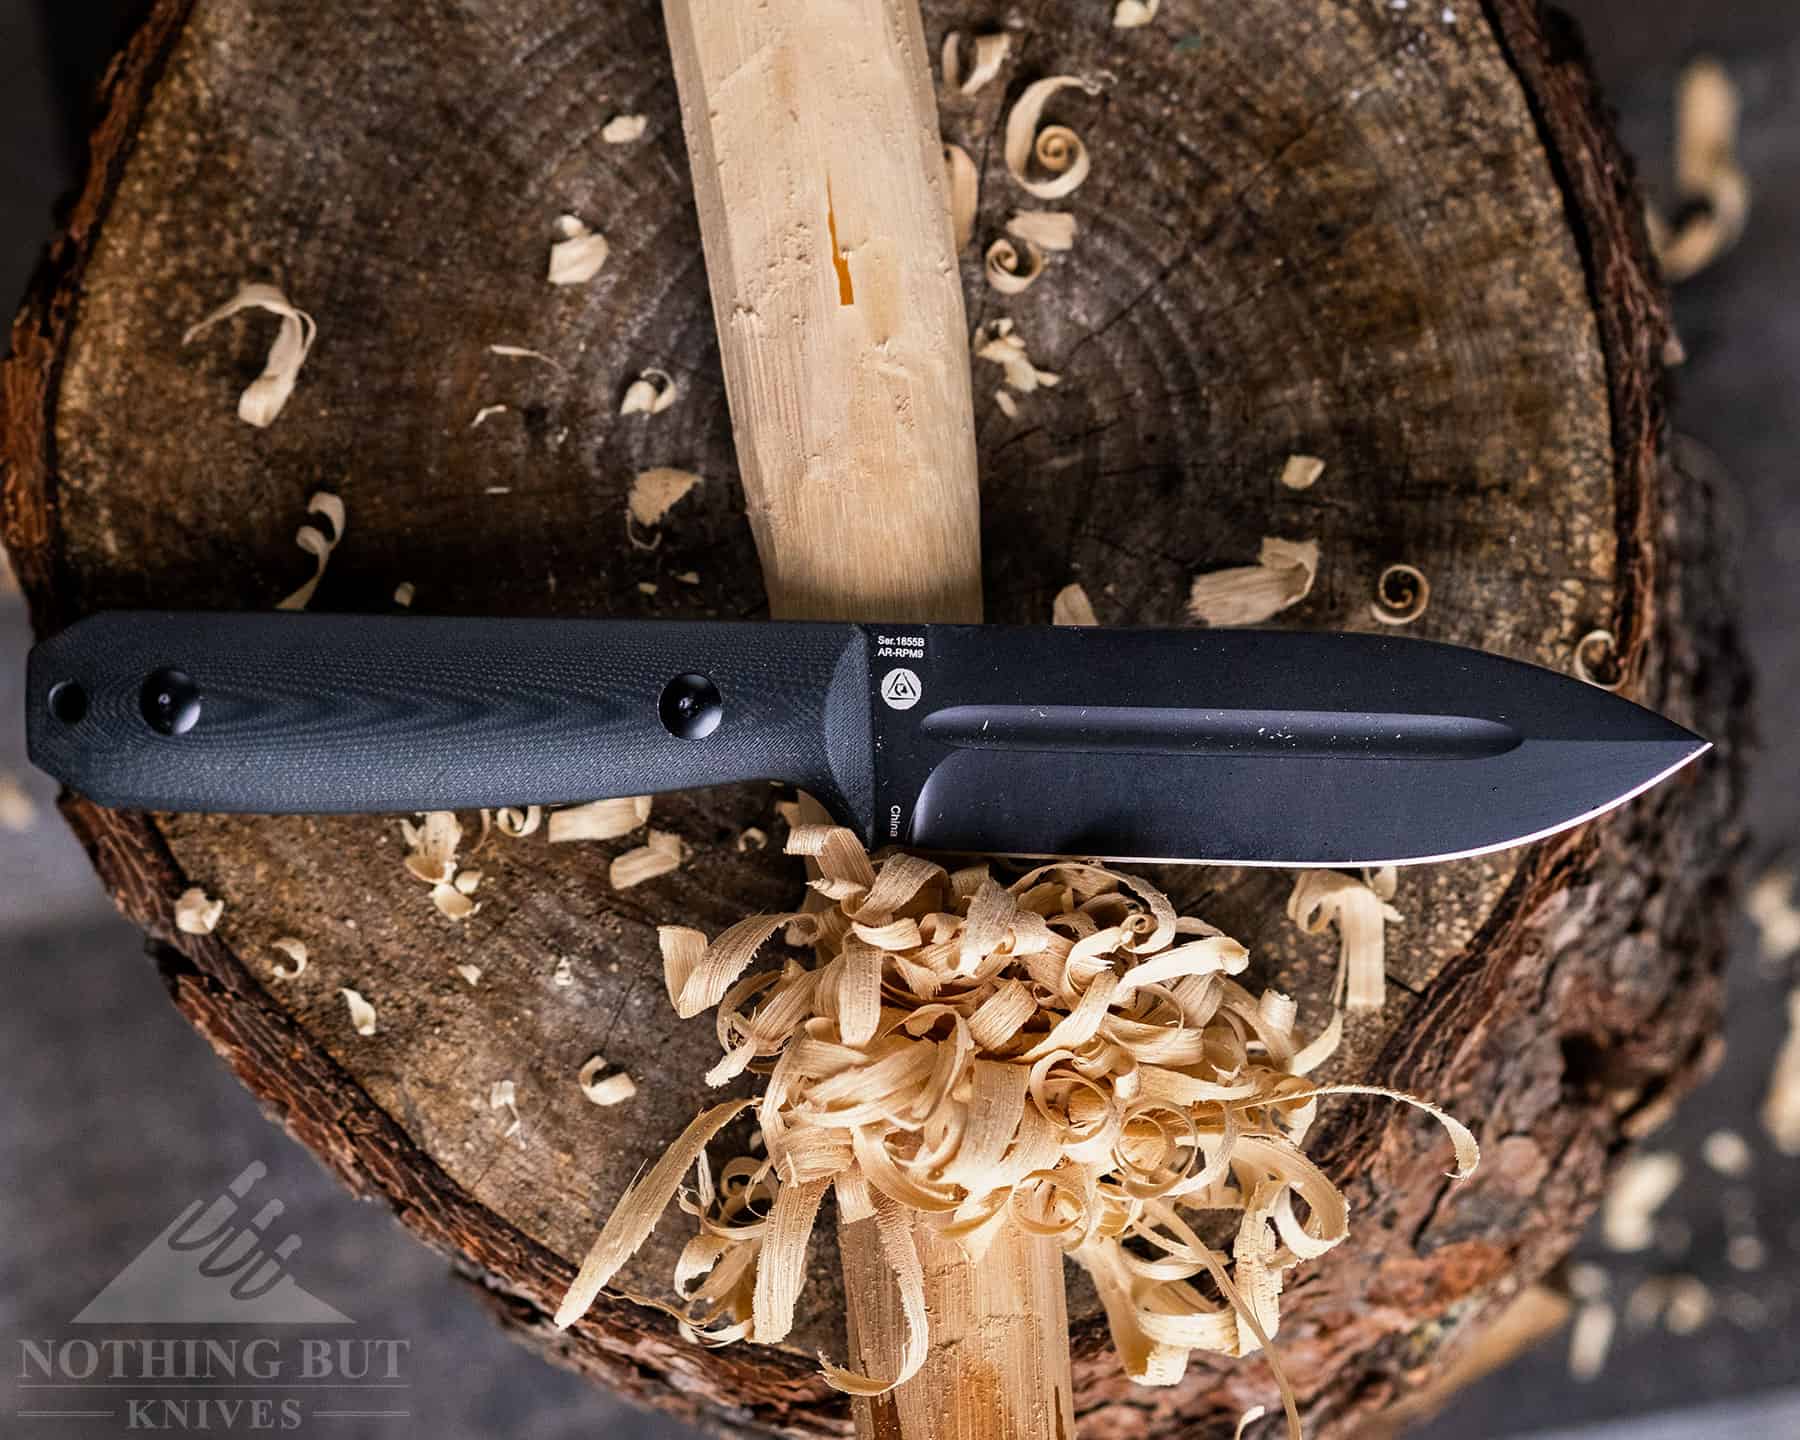 The Artisan Wreckhart does a good job with survival knife tasks like feather sticking. 